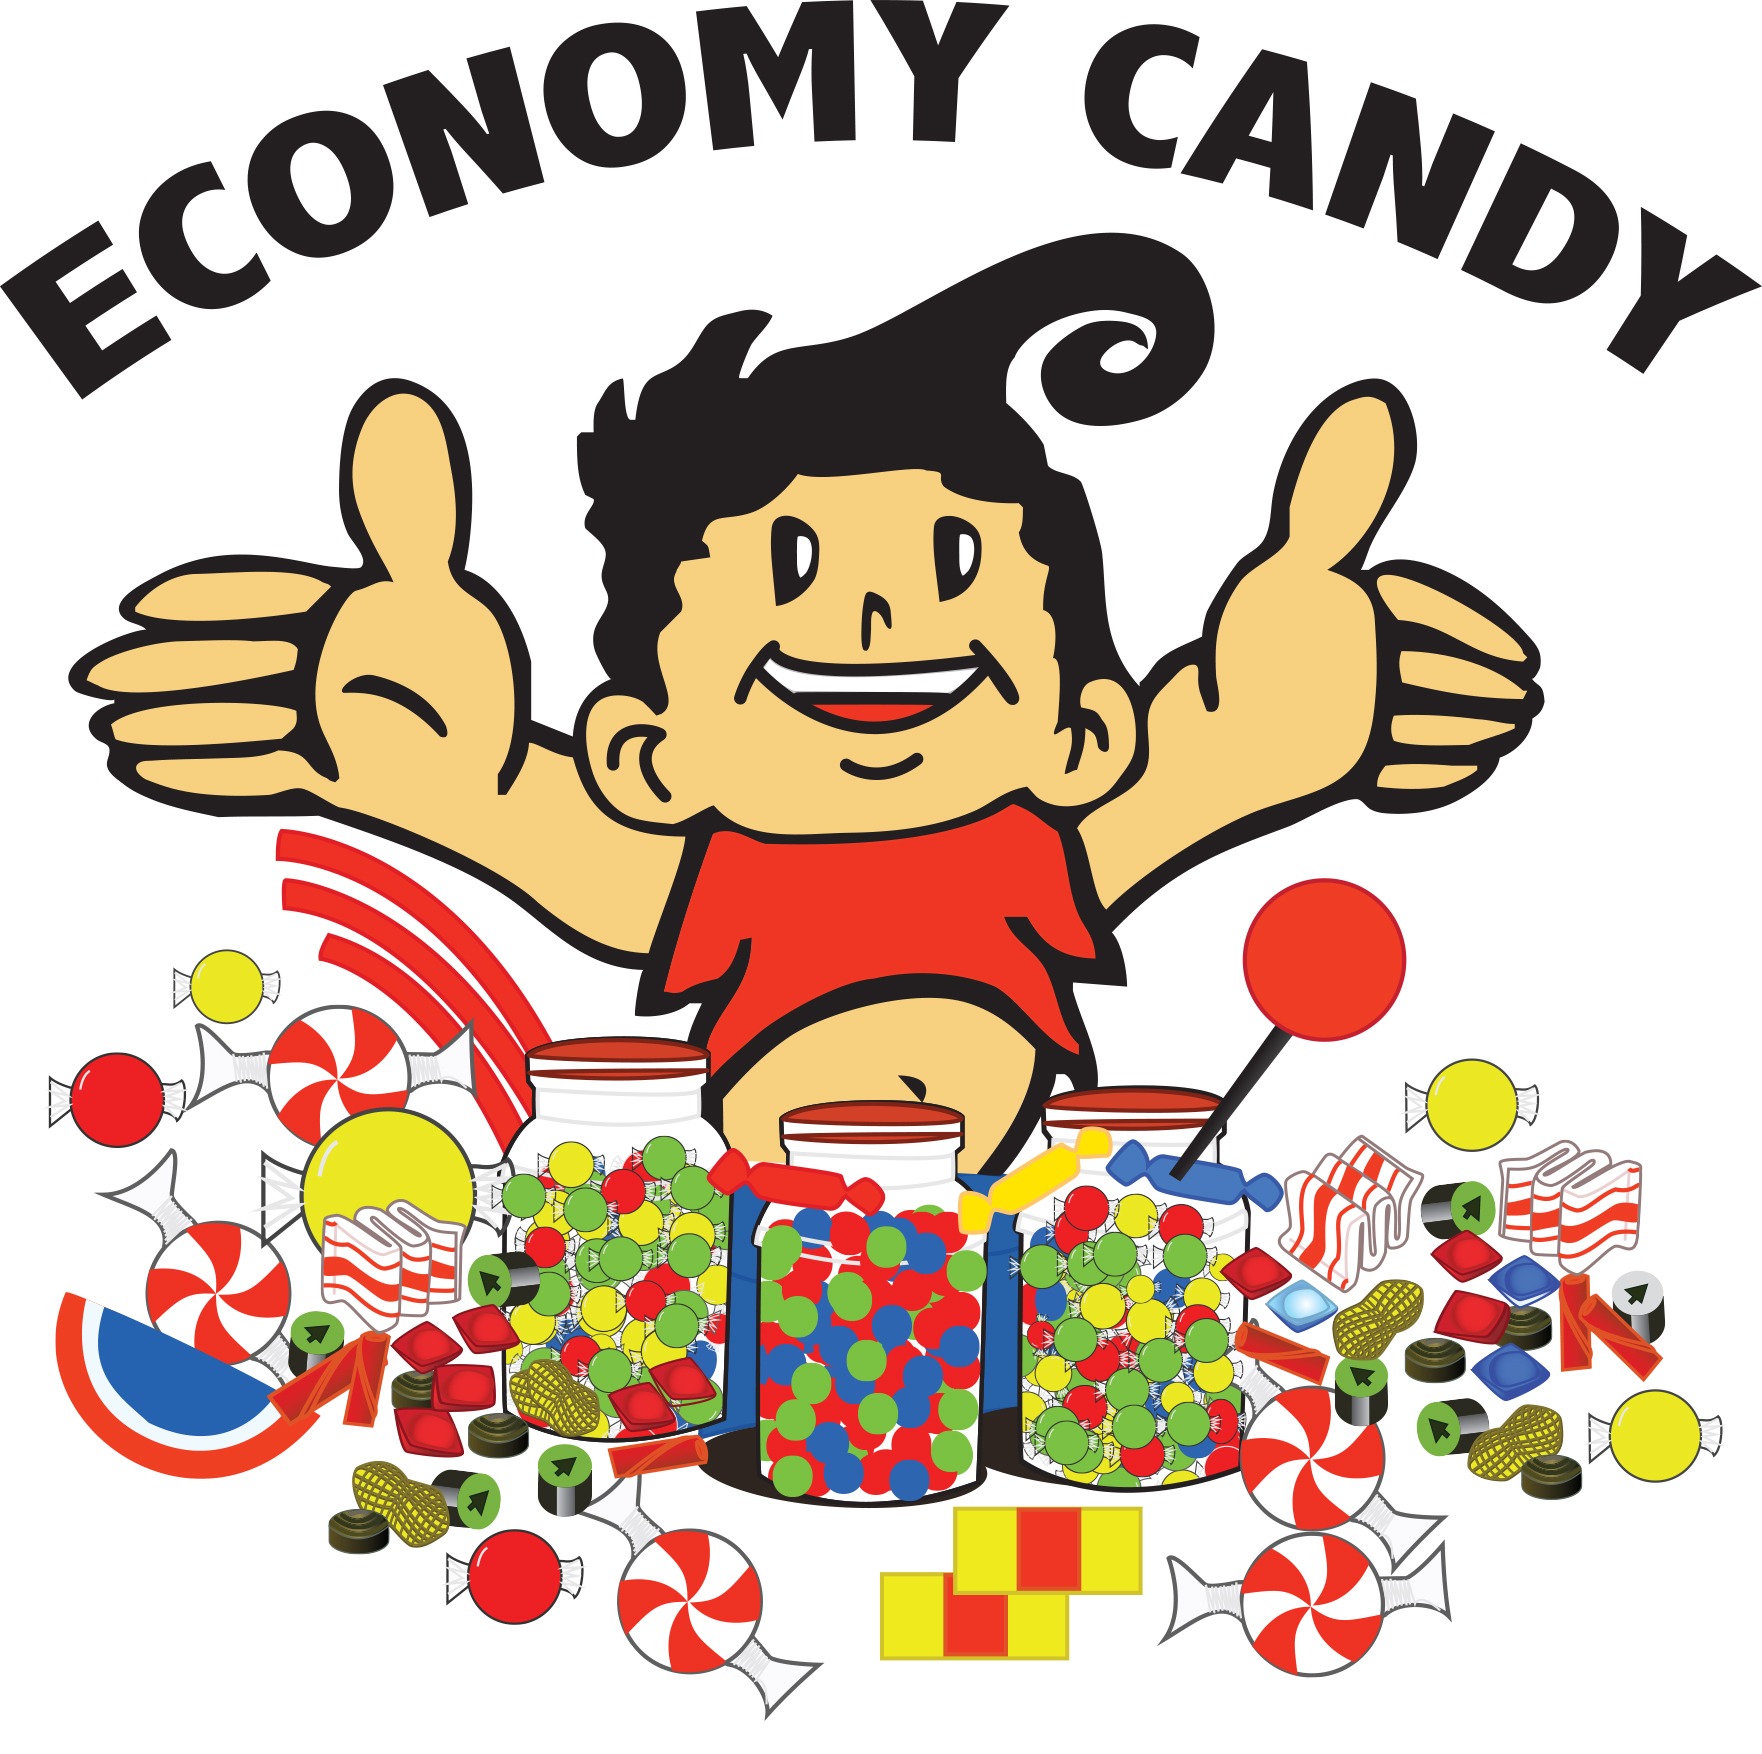 Pre-Made Treat Bags - Economy Candy